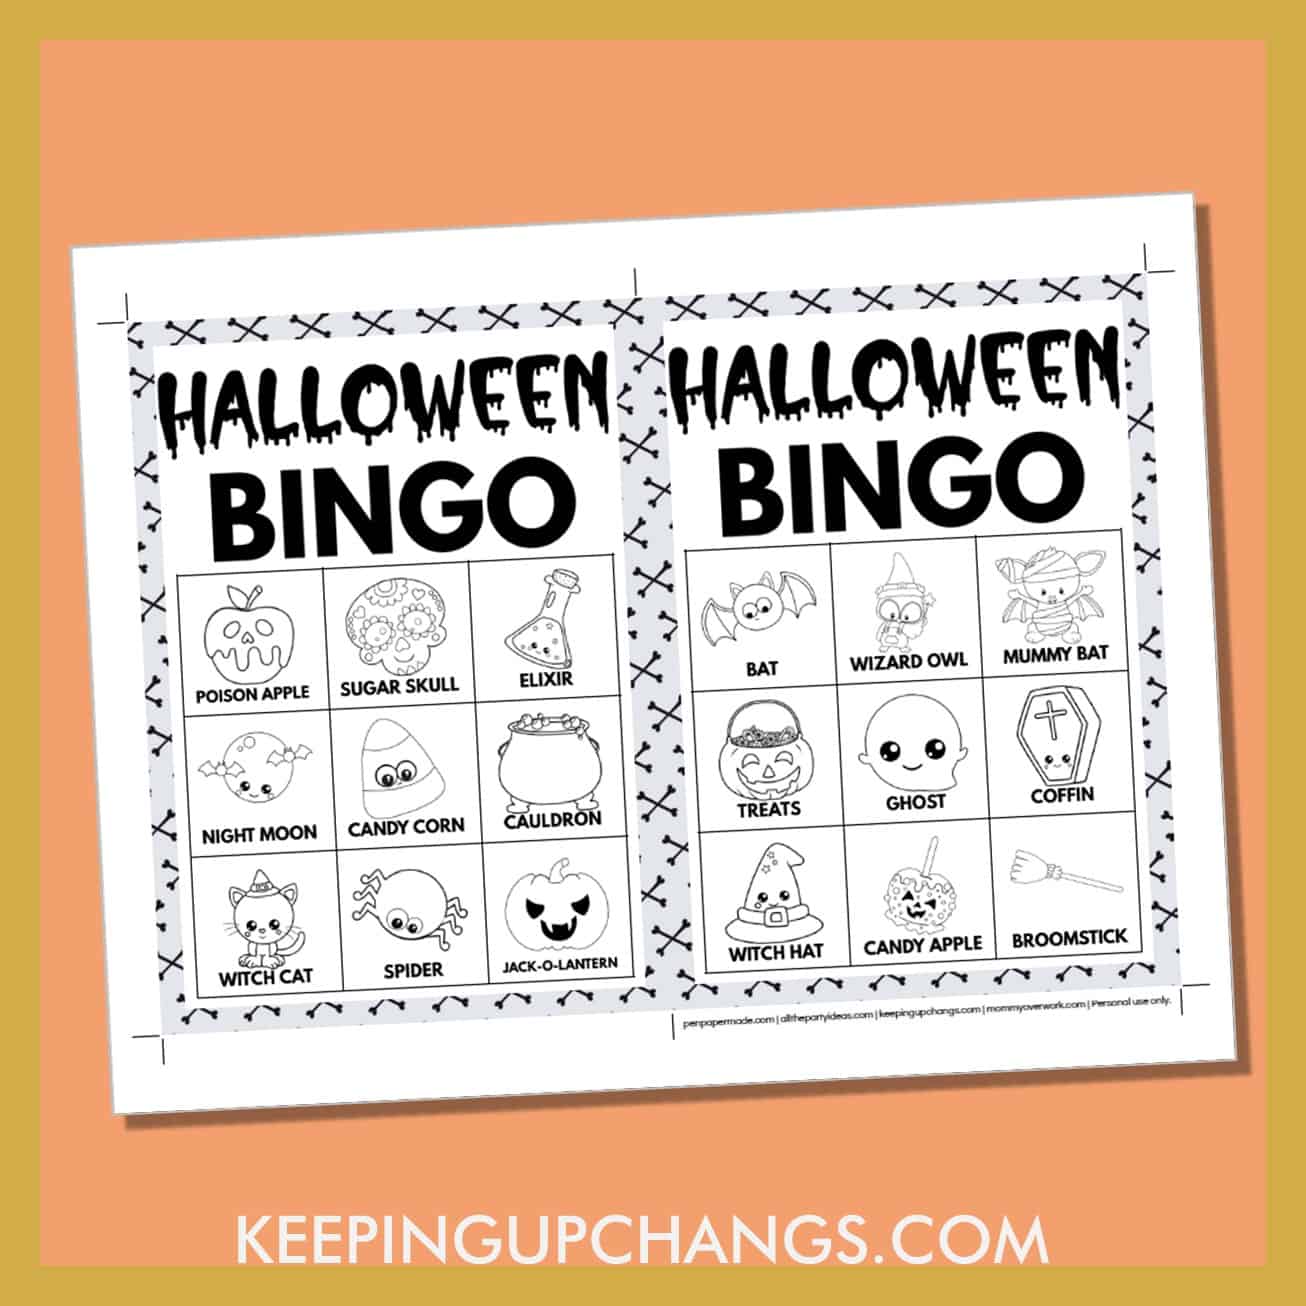 free fall halloween bingo card 3x3 5x7 black white coloring game boards with images and text words.